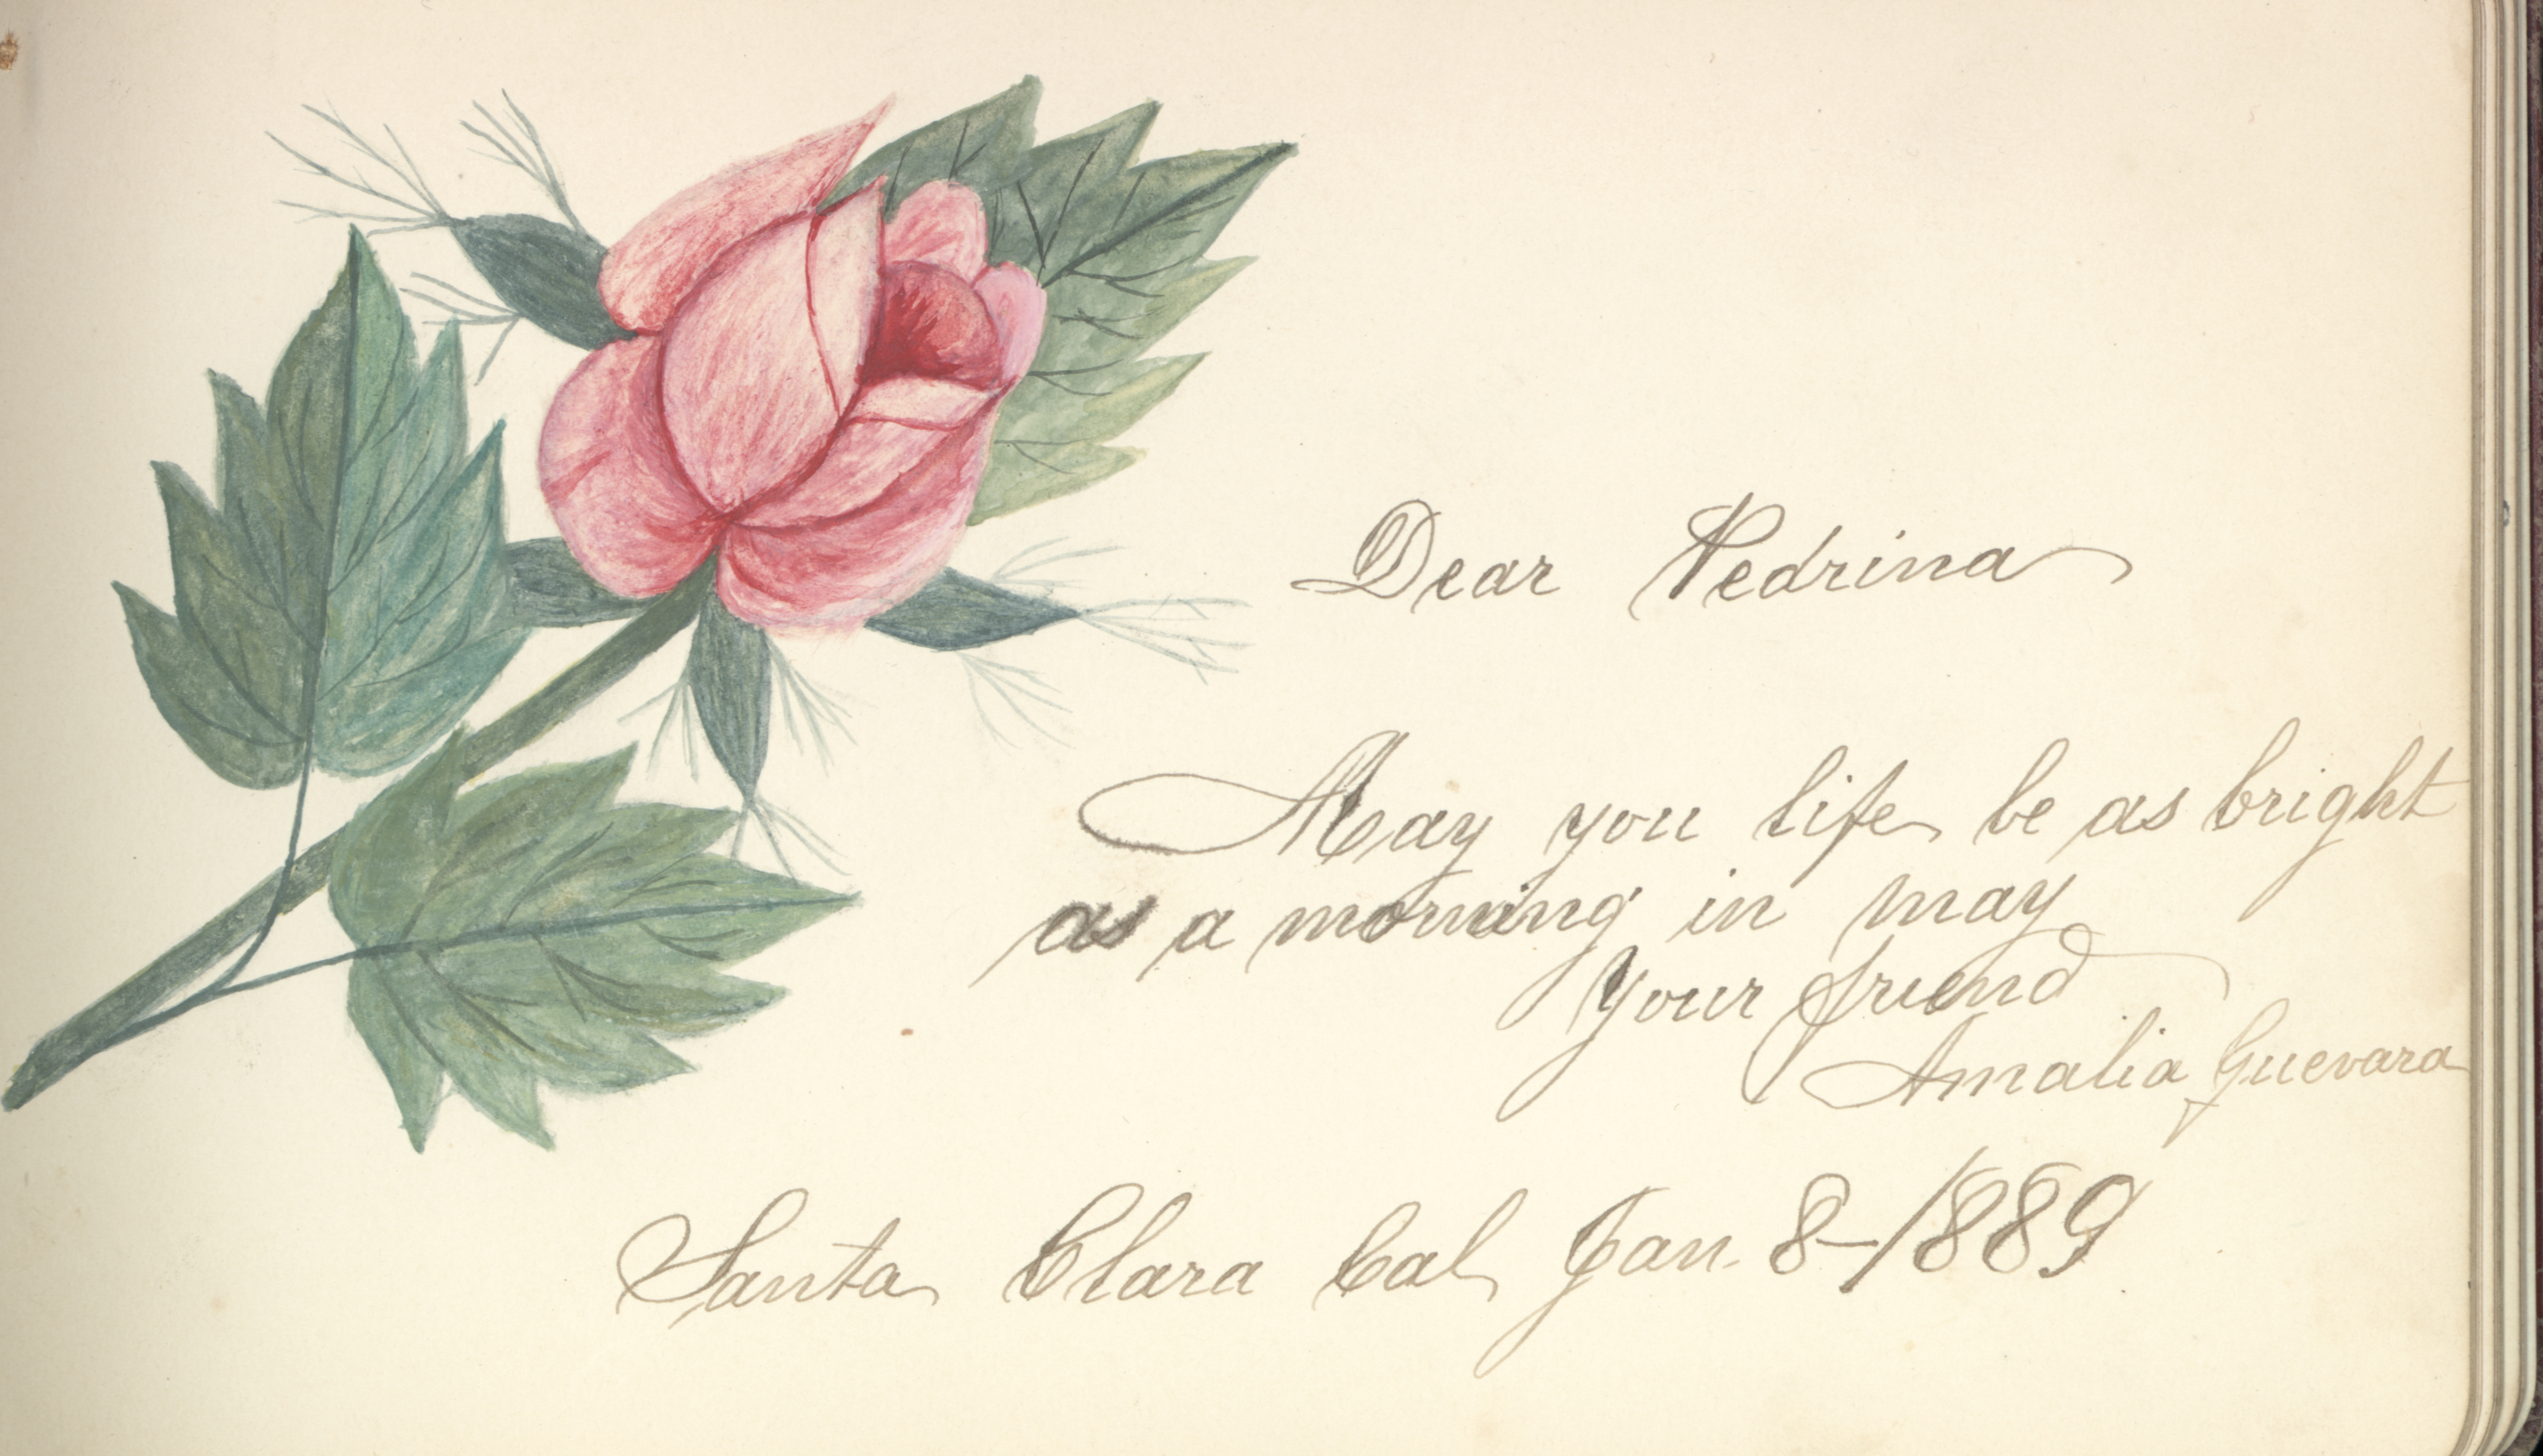 Sketched in 1889, this rose lives the University Archives, tucked in Pedrina Pellerano’s autograph book. Her brother Nicholas Pellerano graduated in 1891.